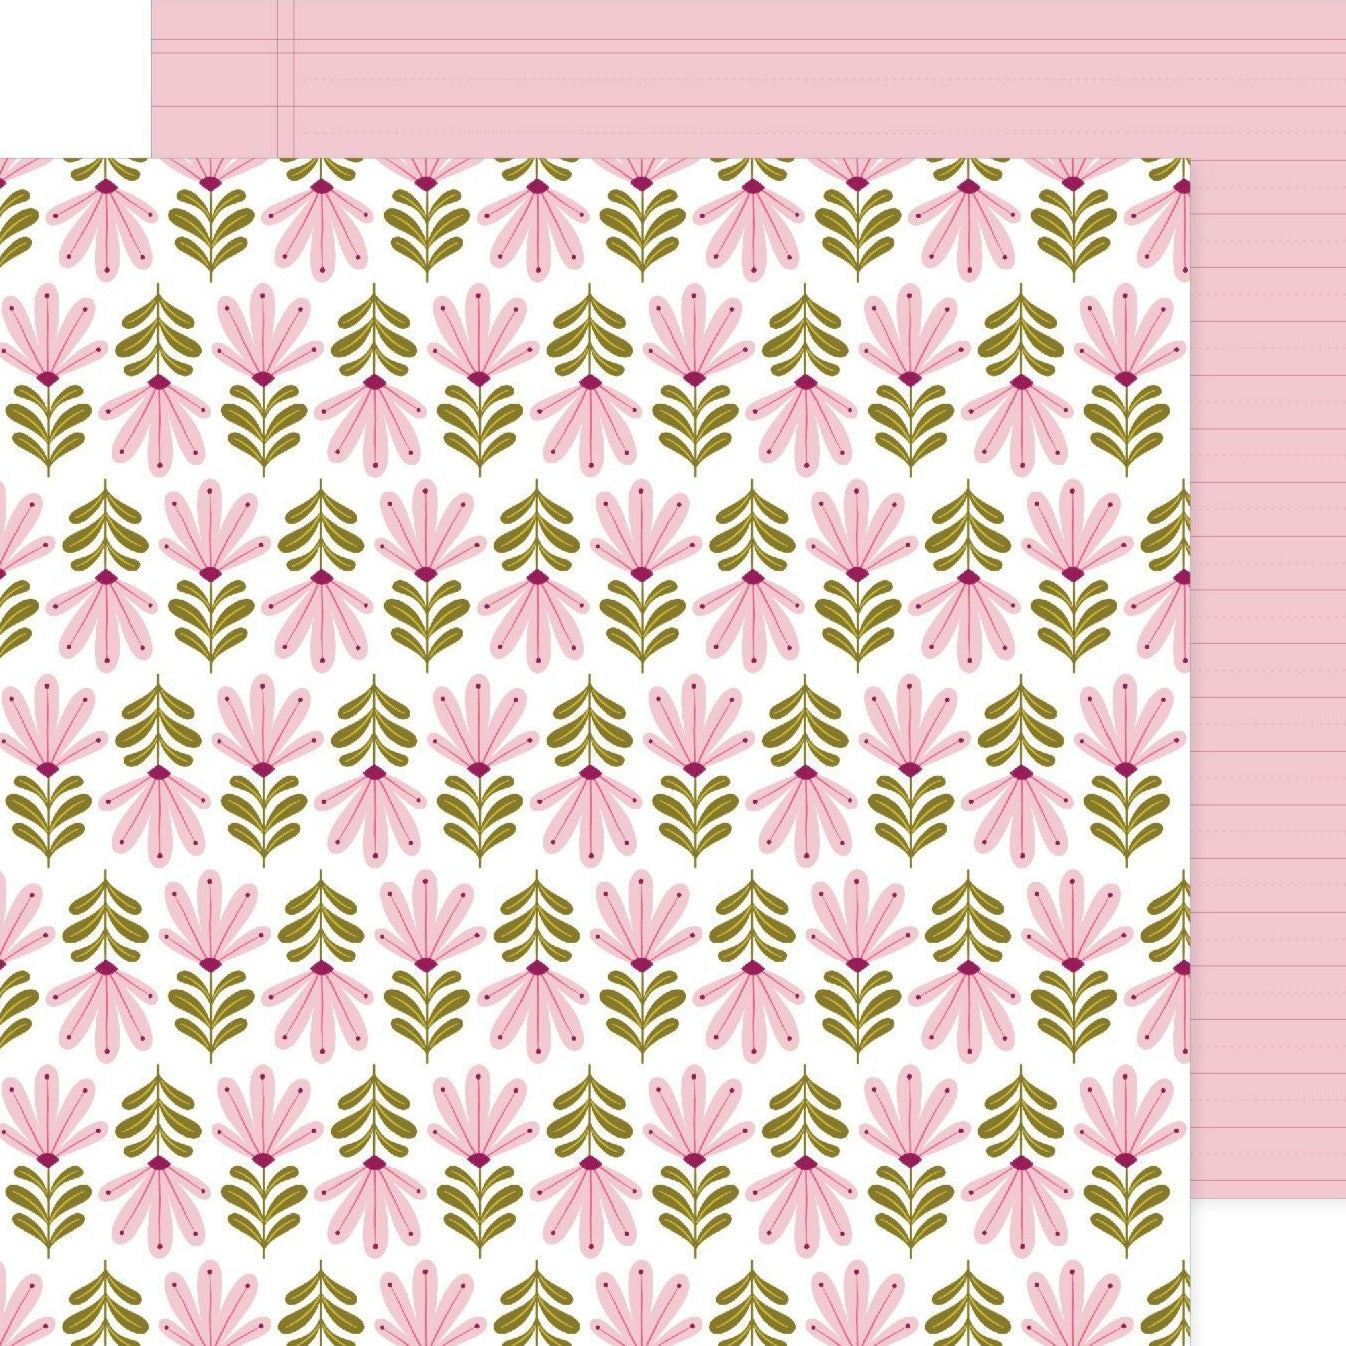 Pink Paislee's double-sided 12x12 paper features a white background adorned with whimsical pink flowers with green leaves on one side and pink-lined notebook paper on the other.